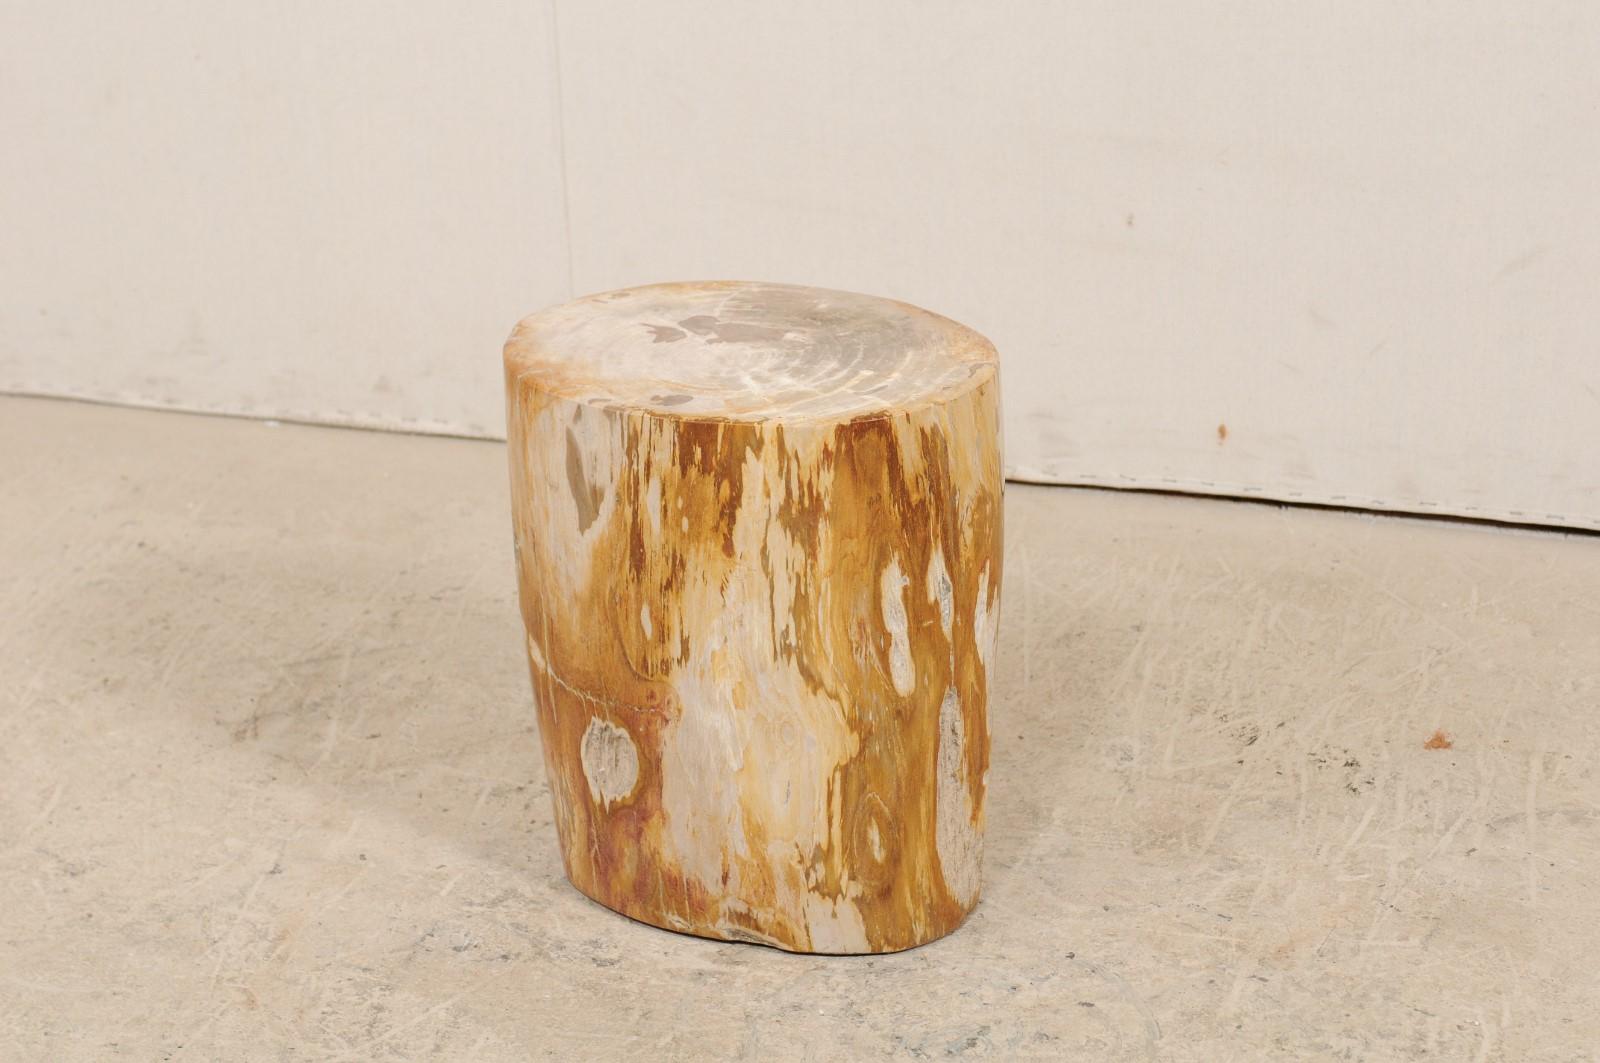 A single light and medium toned petrified wood drinks table or stool. This petrified wood drinks table features a polished finish with hints of natural texture in some areas. Petrified wood is a fossil. Over time, the petrified wood becomes so